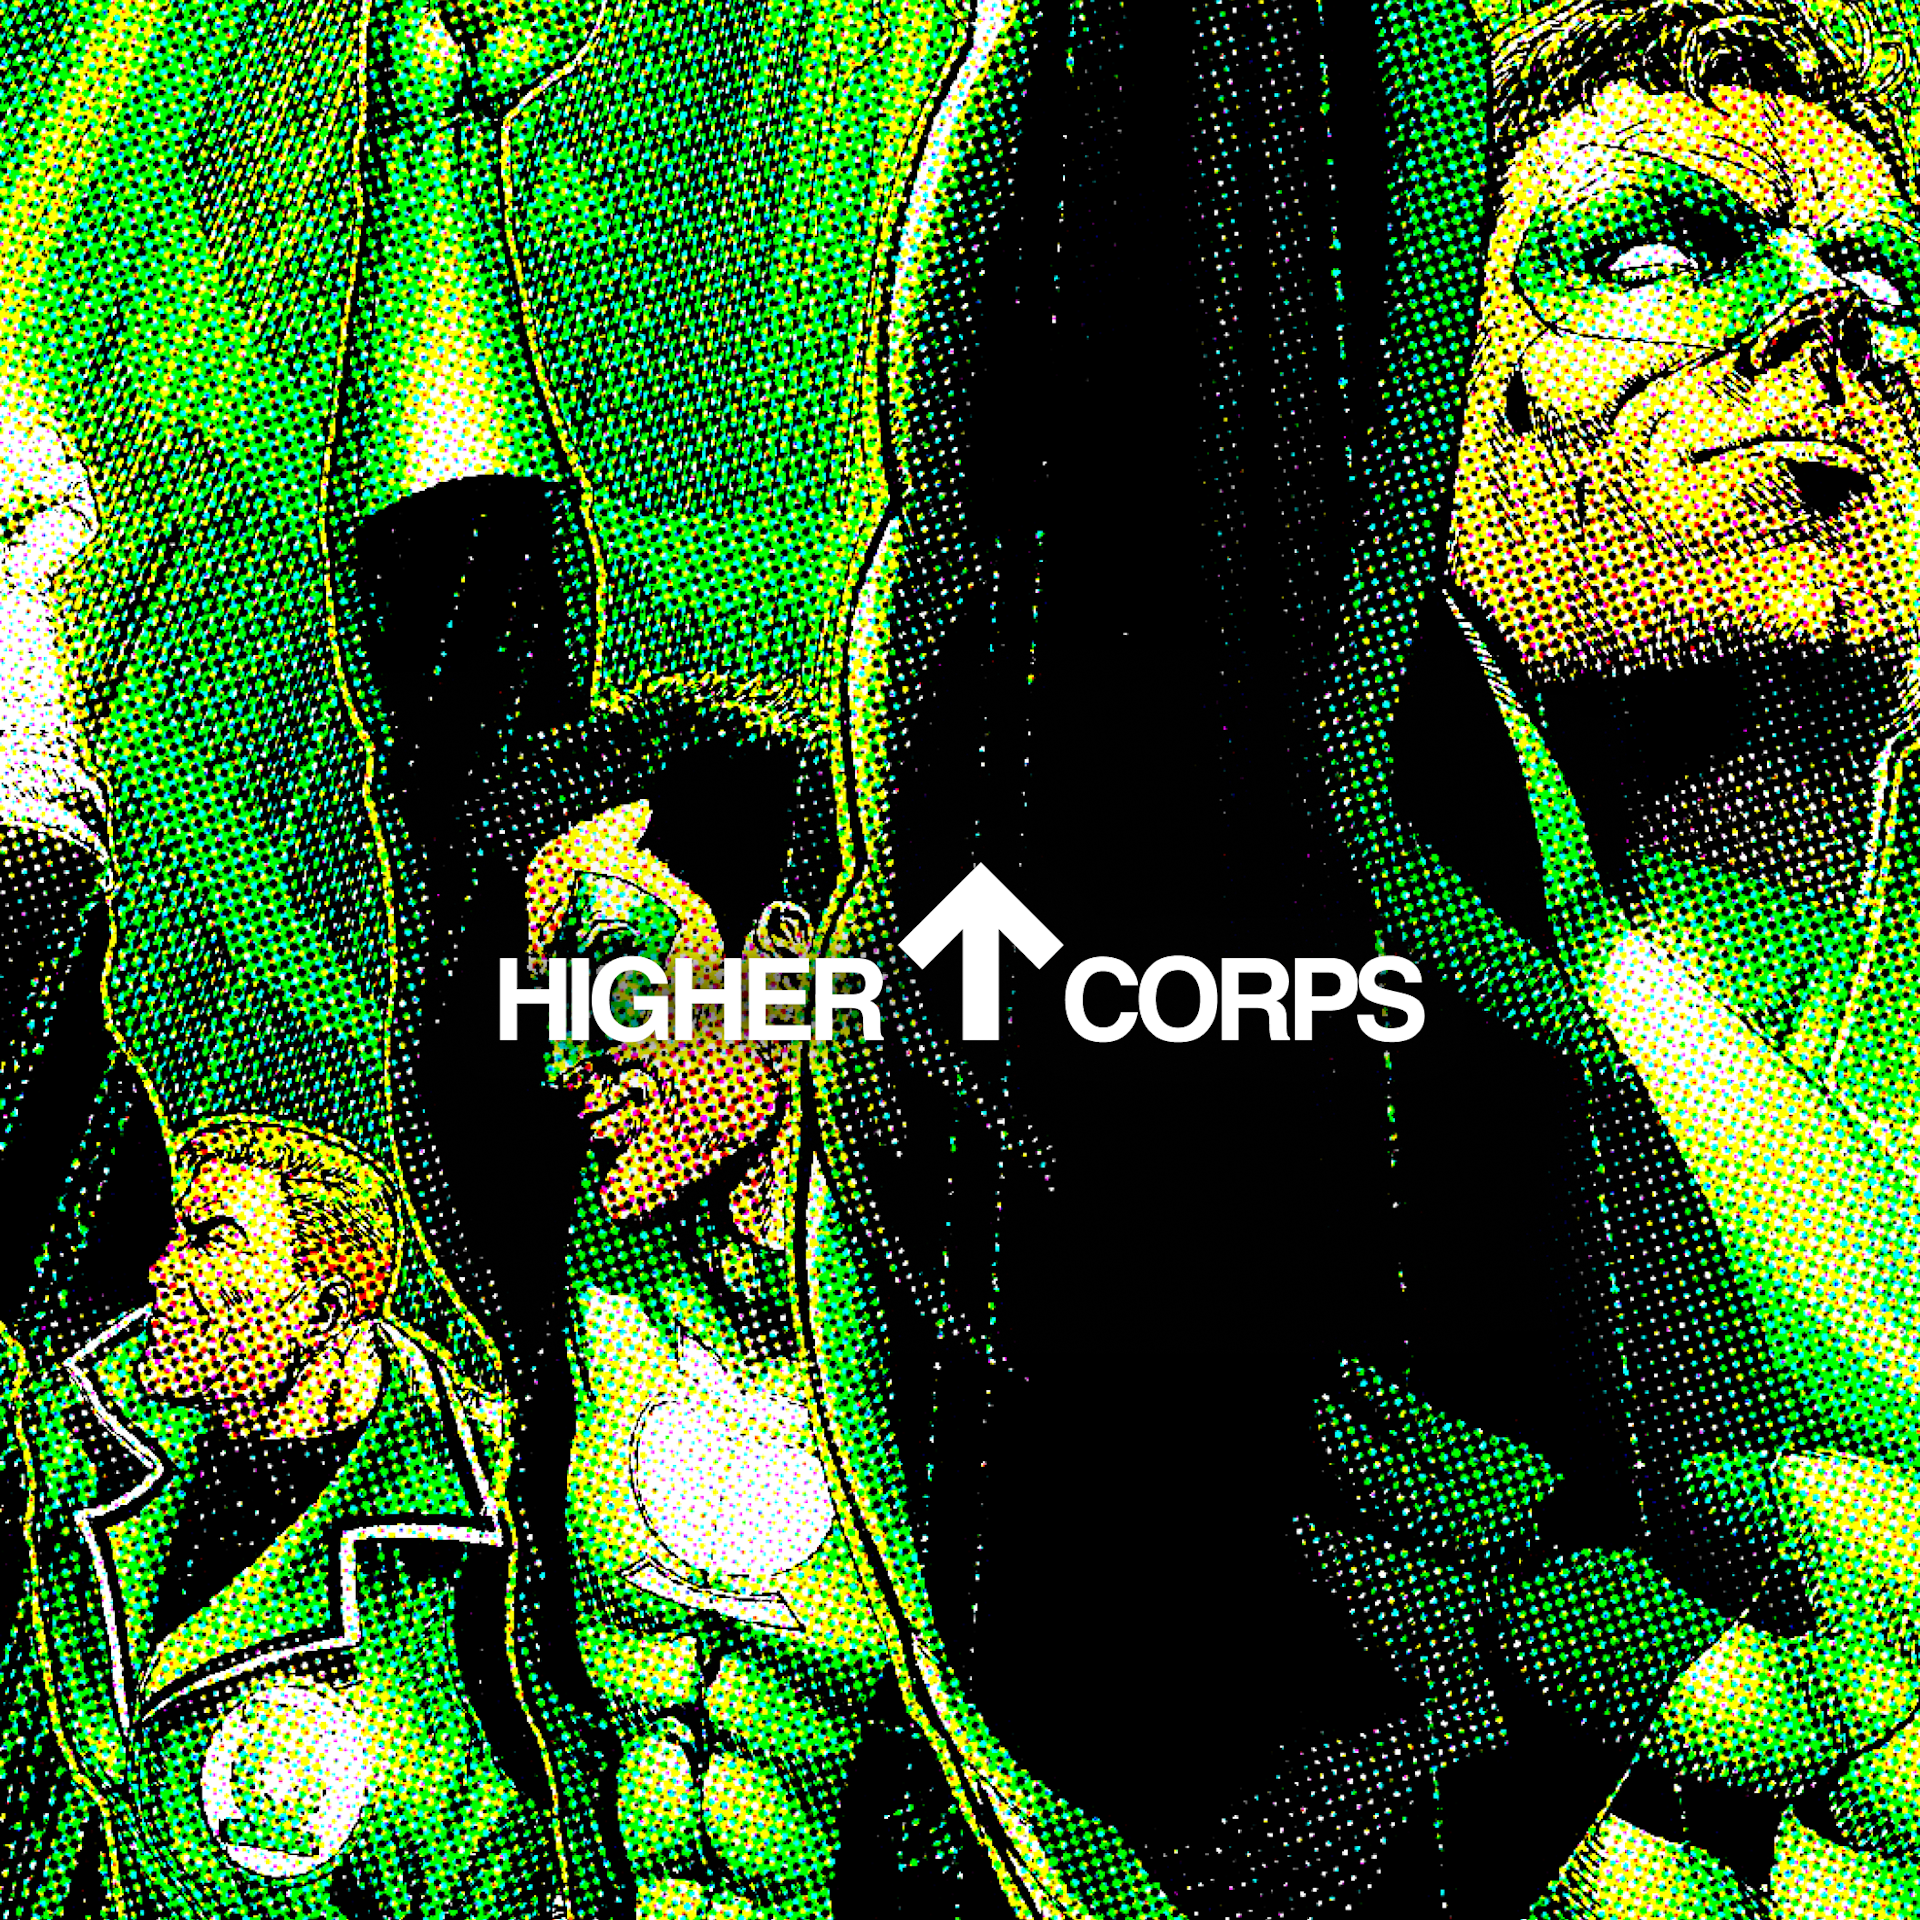 Higher Corps